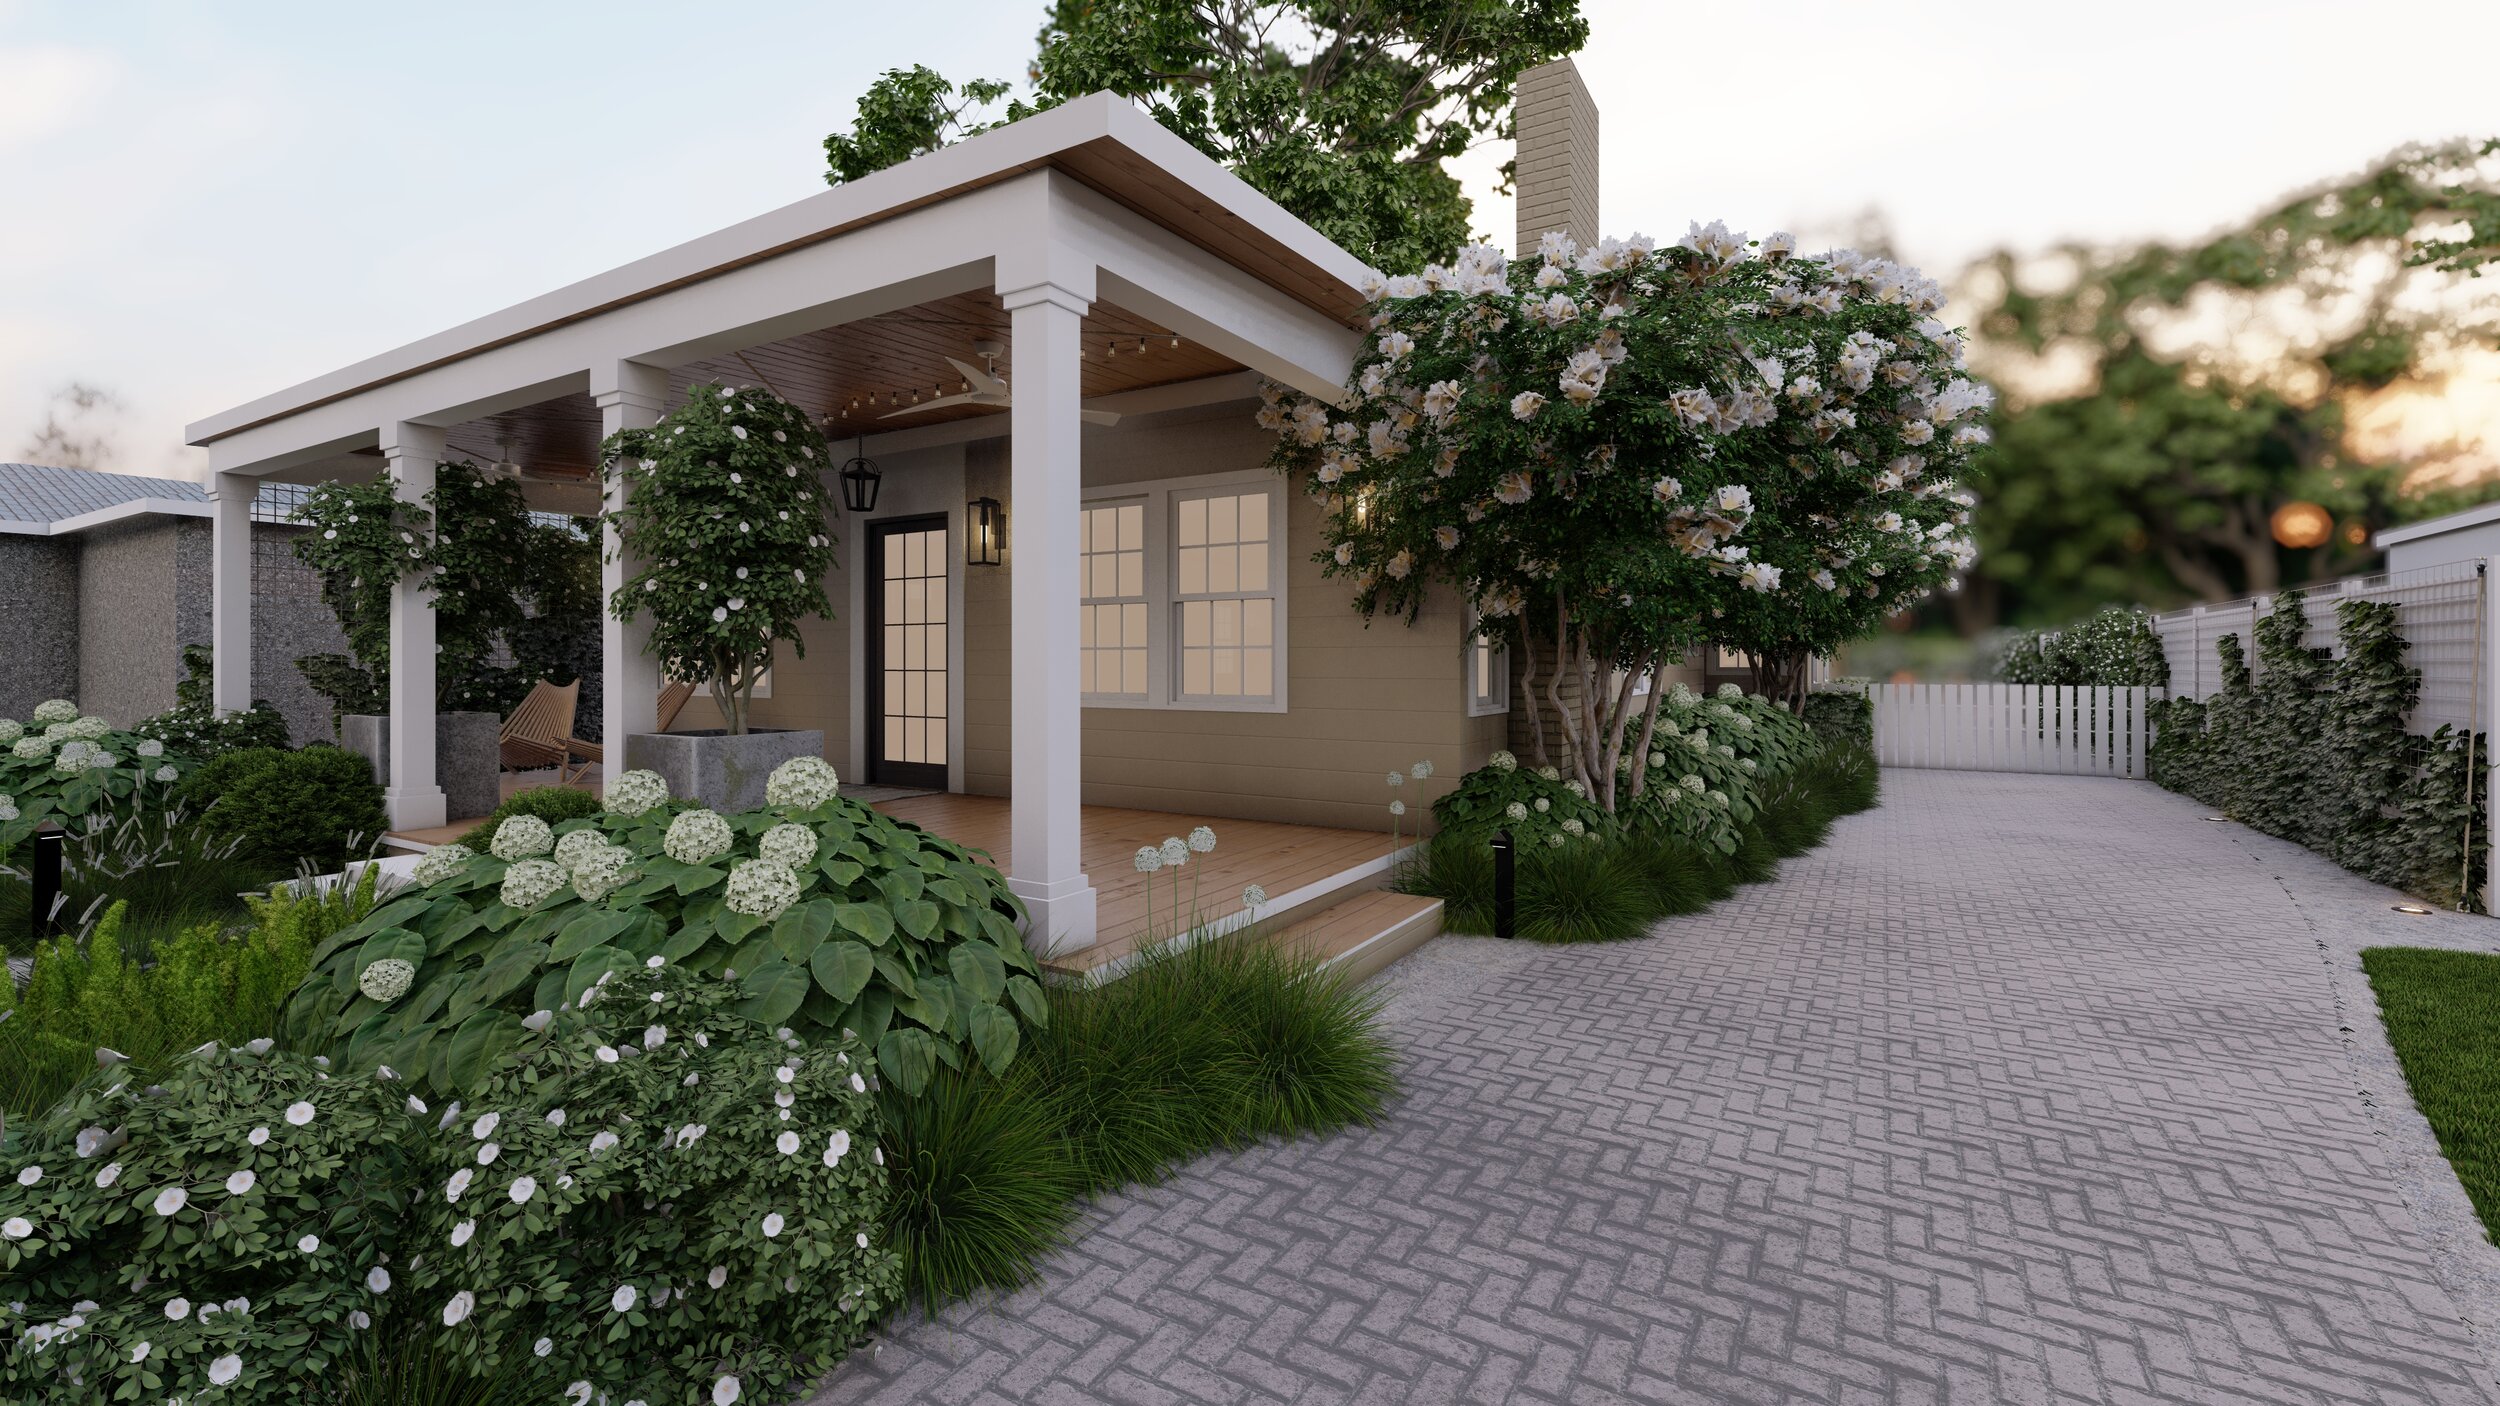 A small house with a porch and a covered patio surrounded by white flowering plants